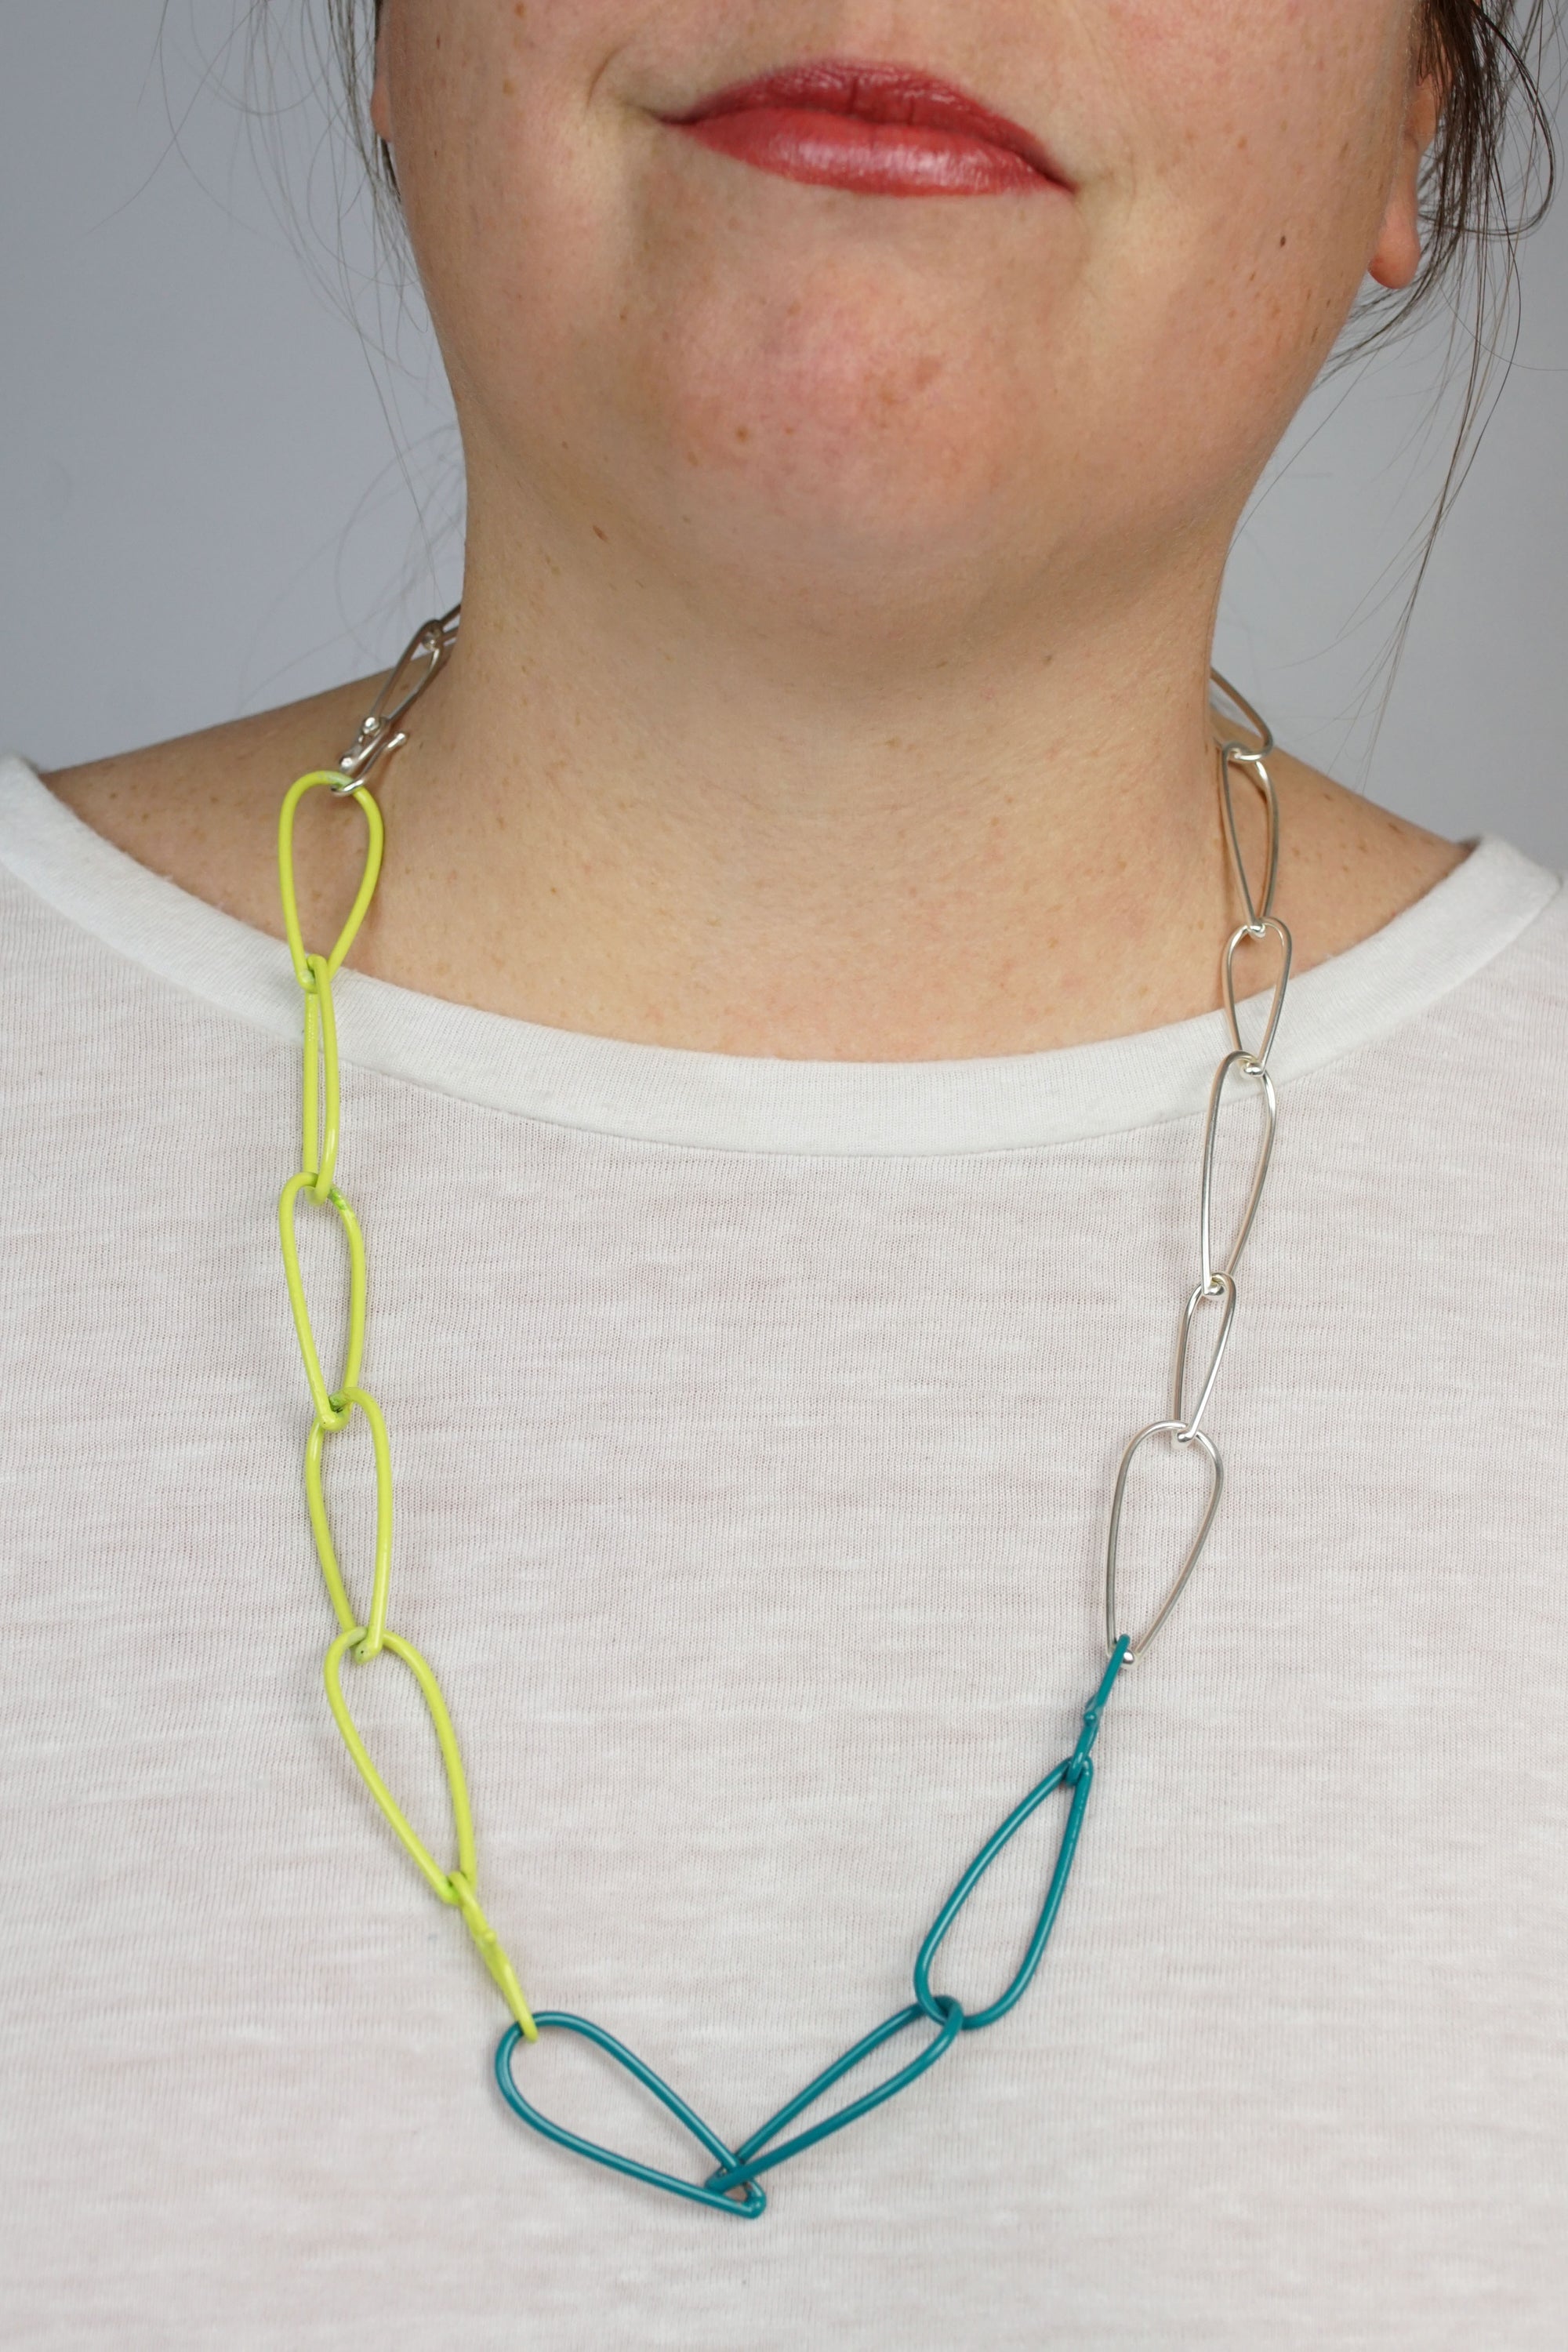 Modular Necklace in Silver, Neon Chartreuse, and Bold Teal